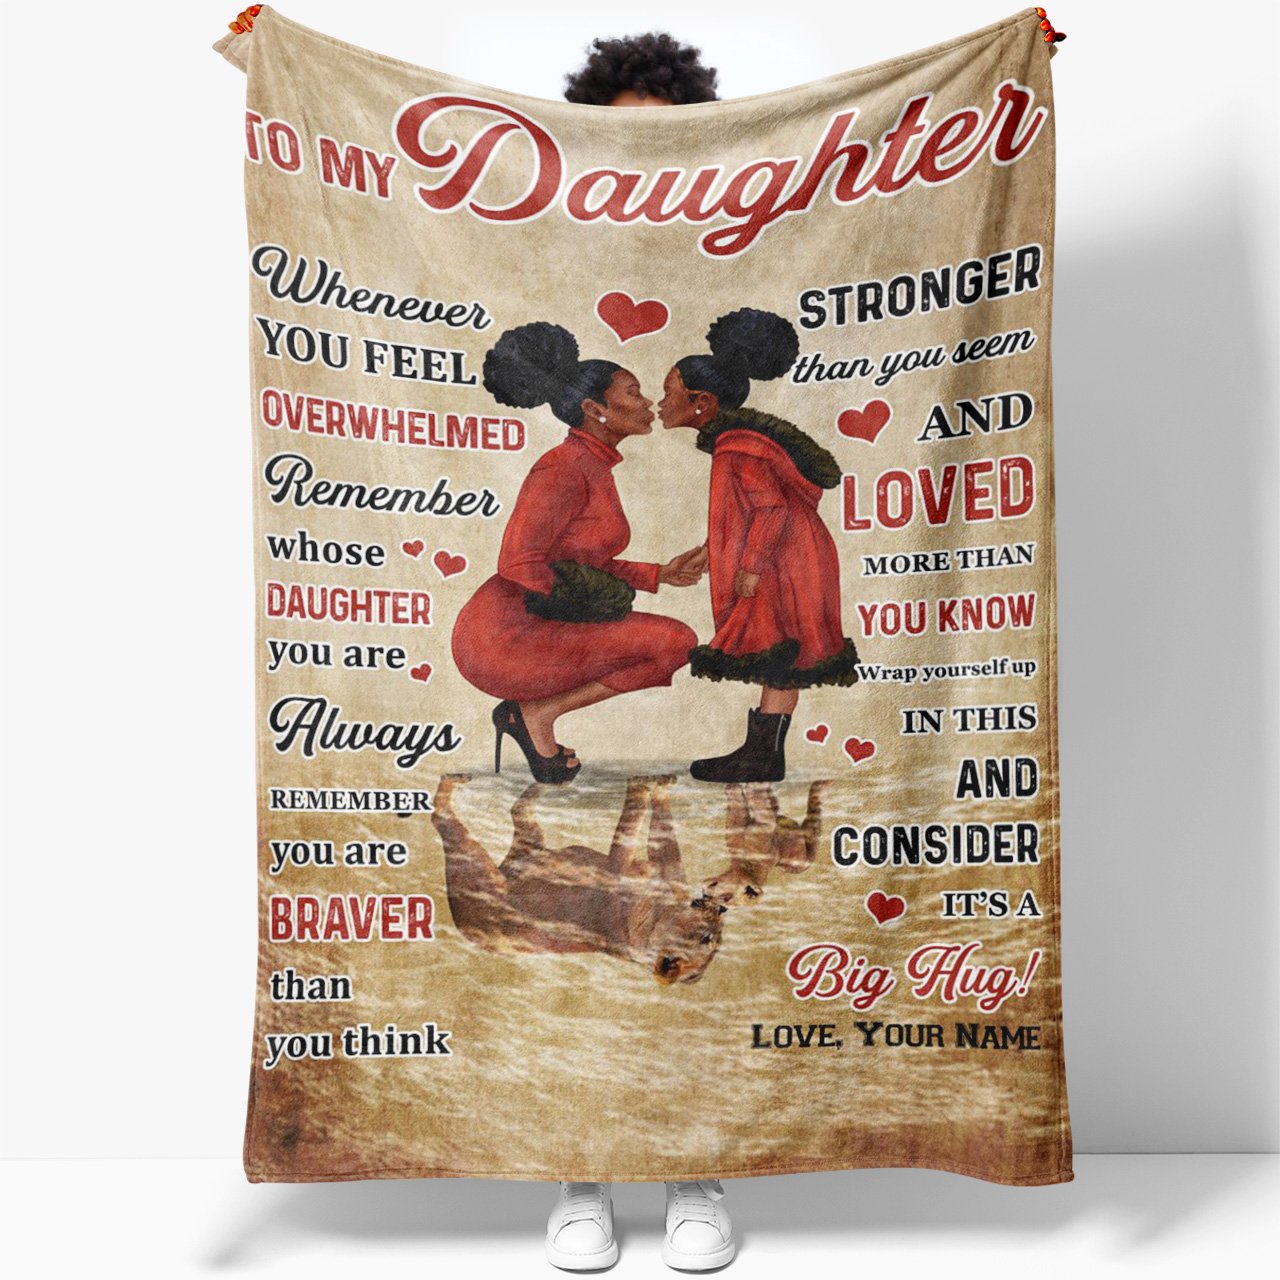 Blanket To My Daughter Gift, Whenever You Feel Overwhelmed Blanket, Presents For Daughter, Sentimental College Graduation Gifts For Daughter